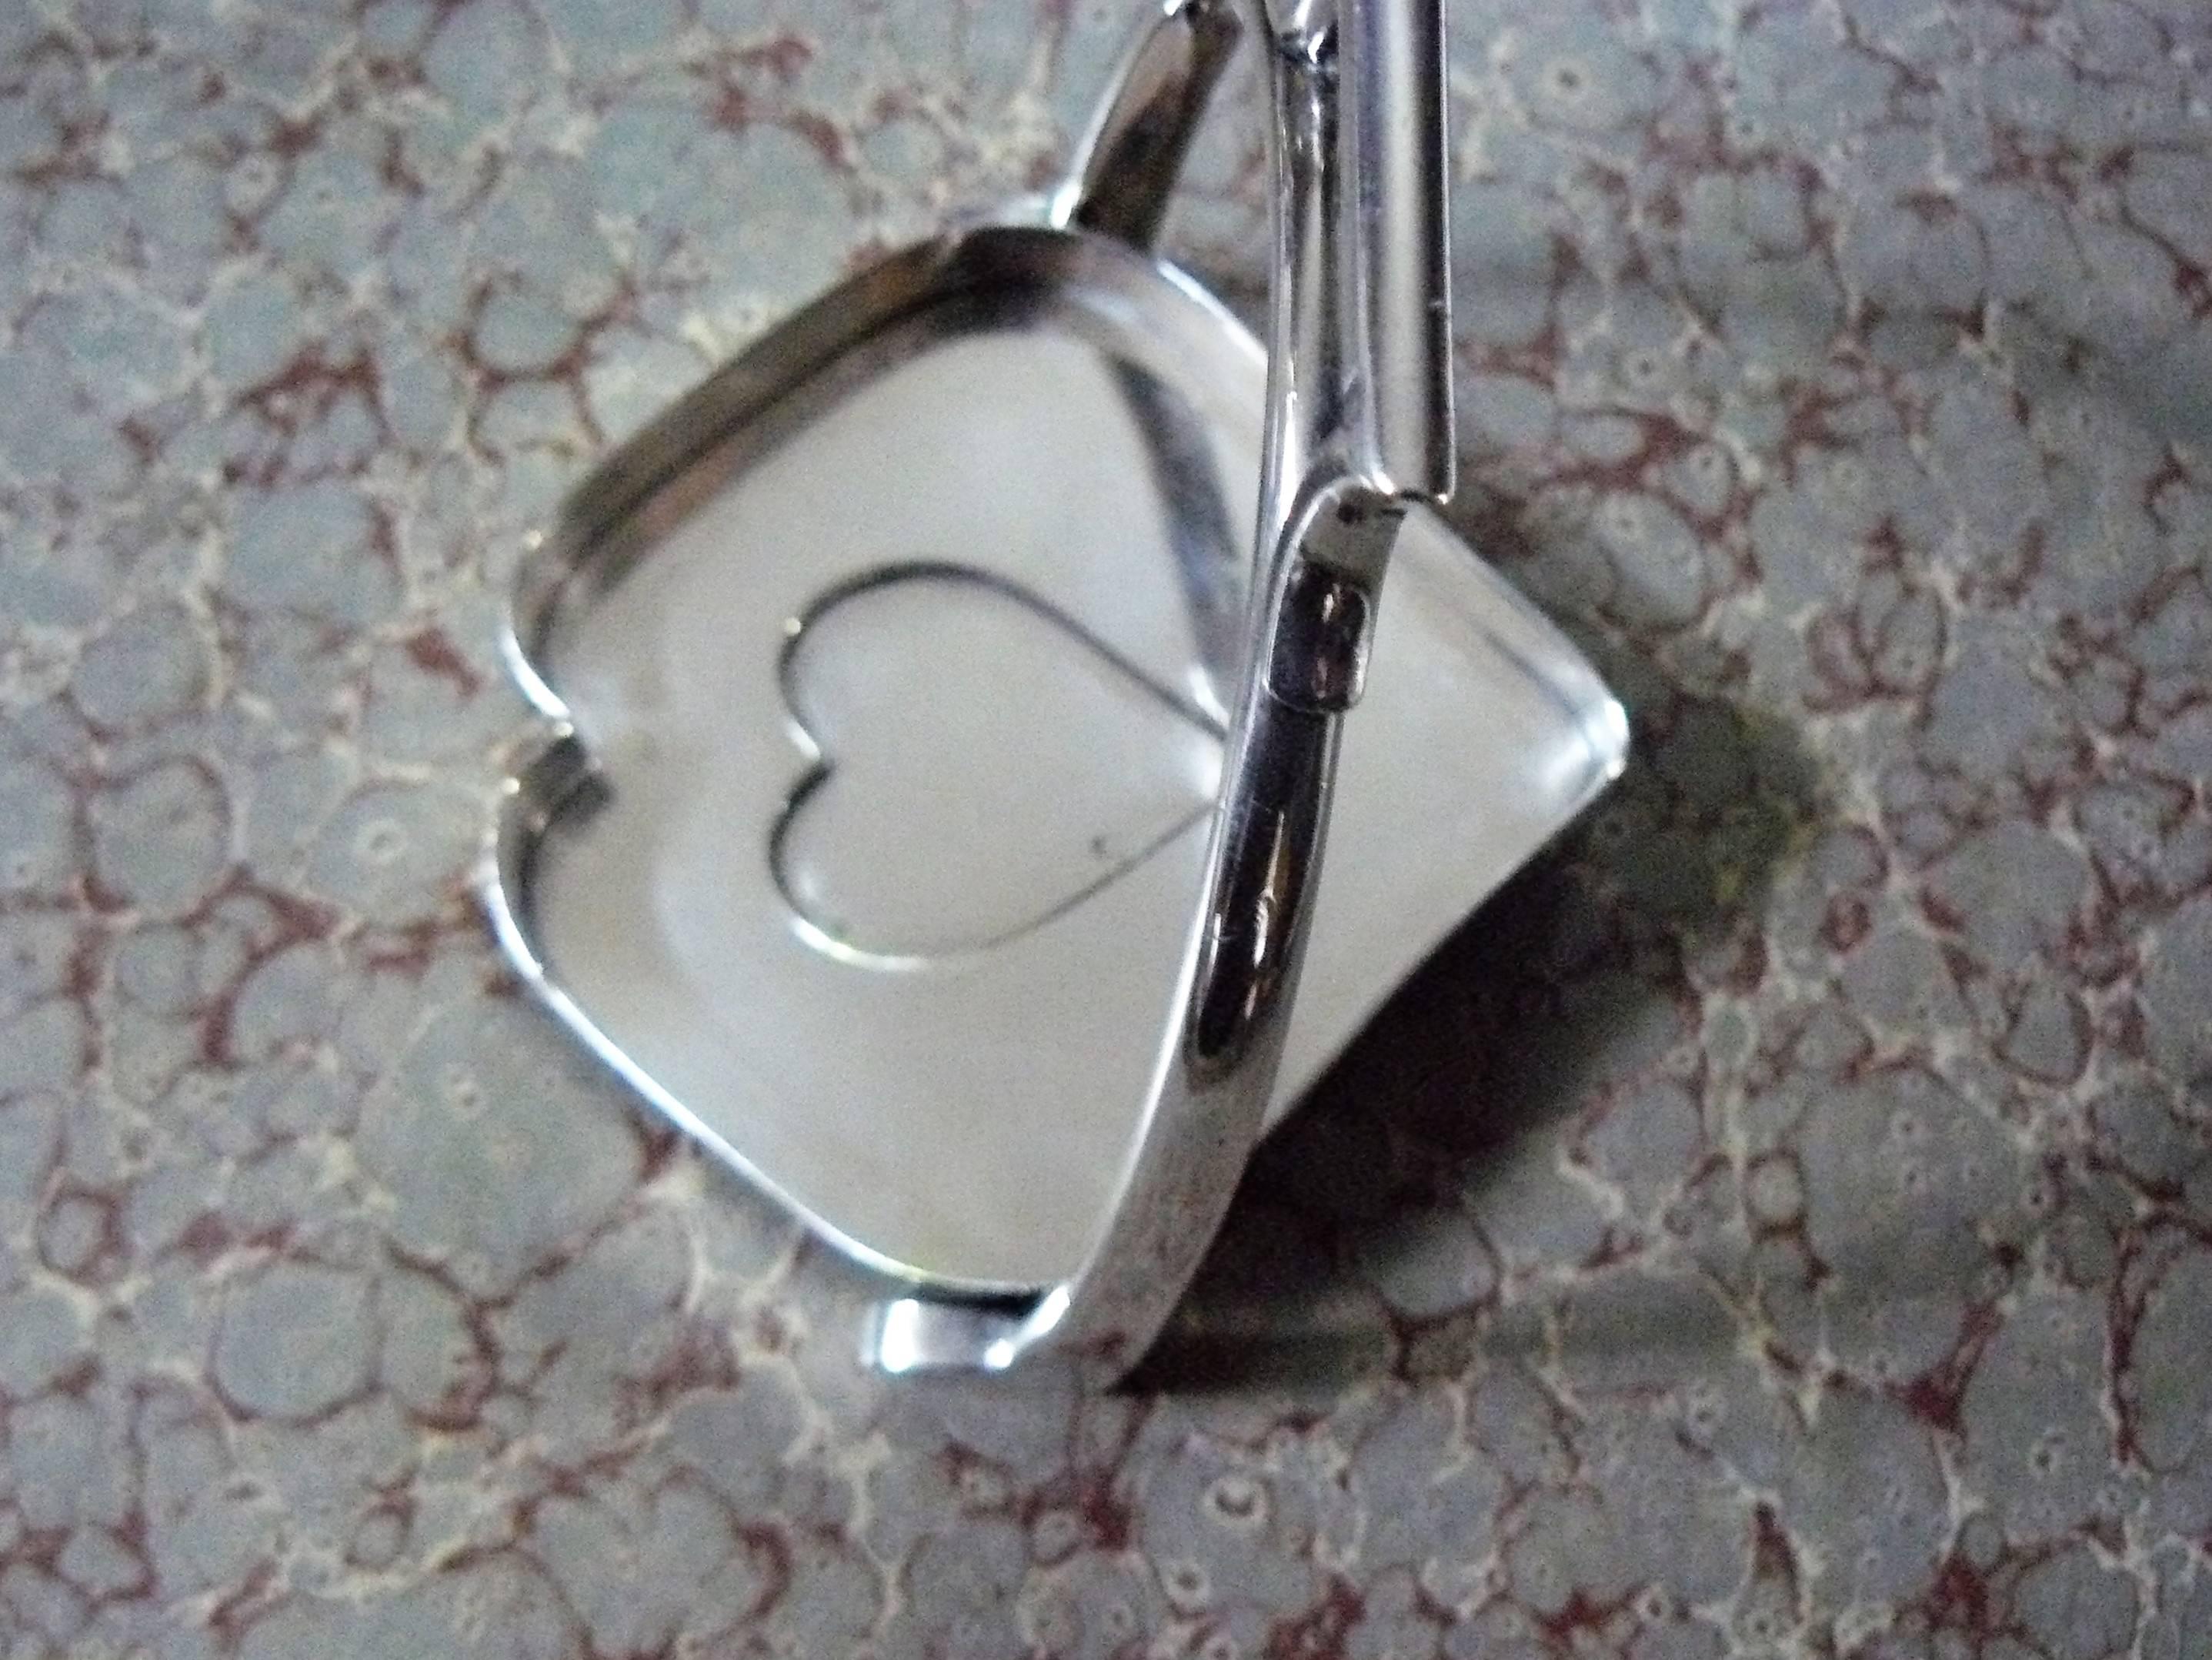 Vintage and rare Mellerio Dits Meller silver stirrup ashtray.(1930s).
Very original heart-shaped object,
Weight: 200grs approximately.
Stamp and signature: Mellerio Dits Meller.